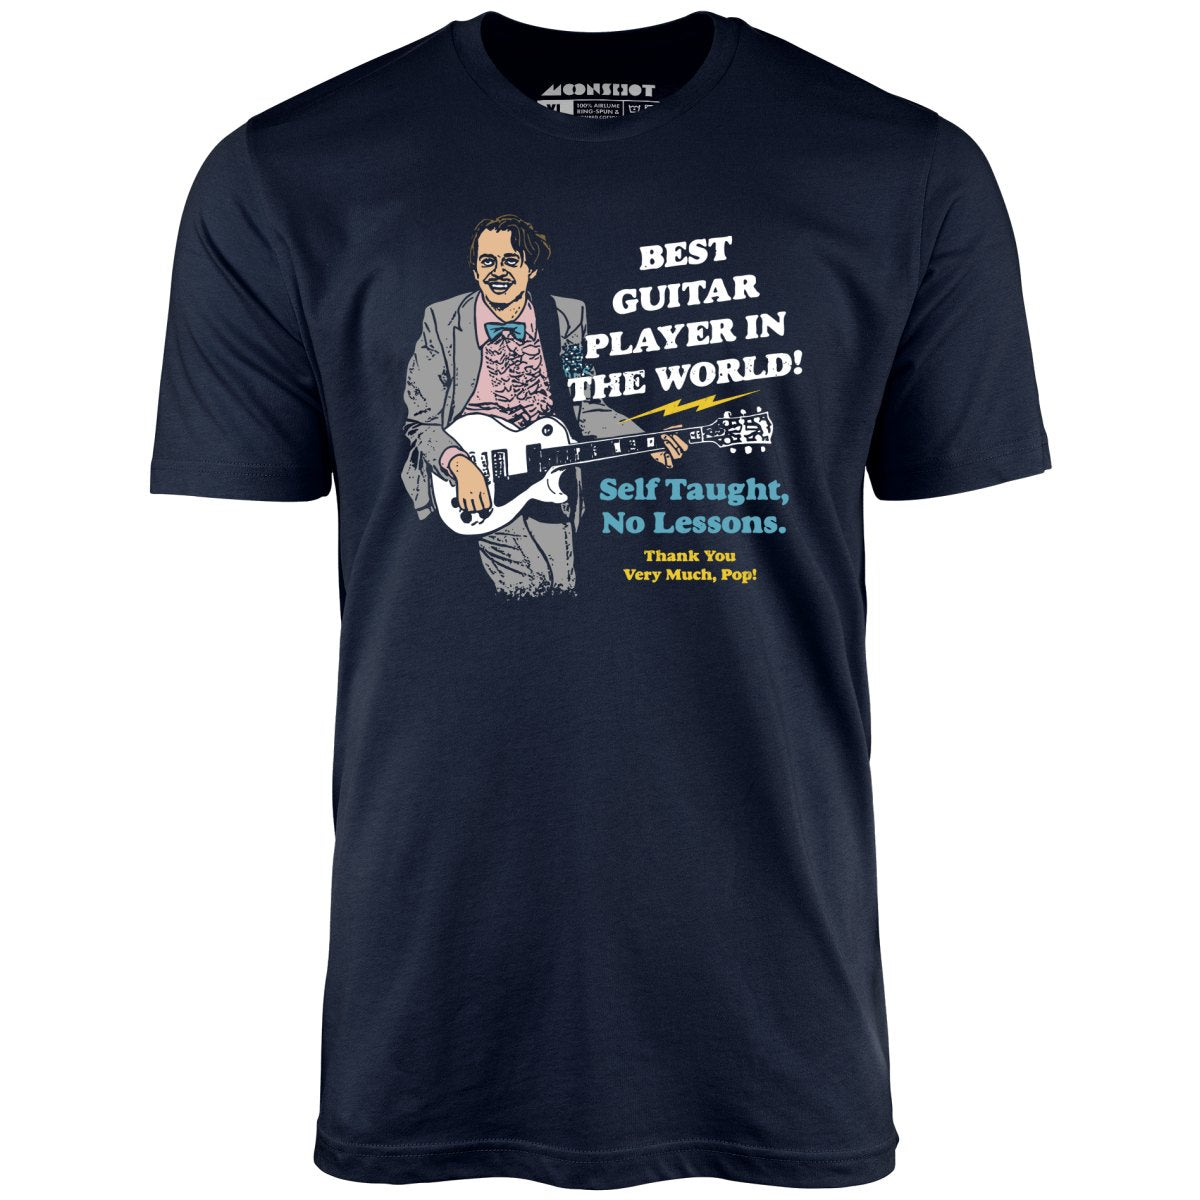 Best Guitar Player in The World! - Unisex T-Shirt